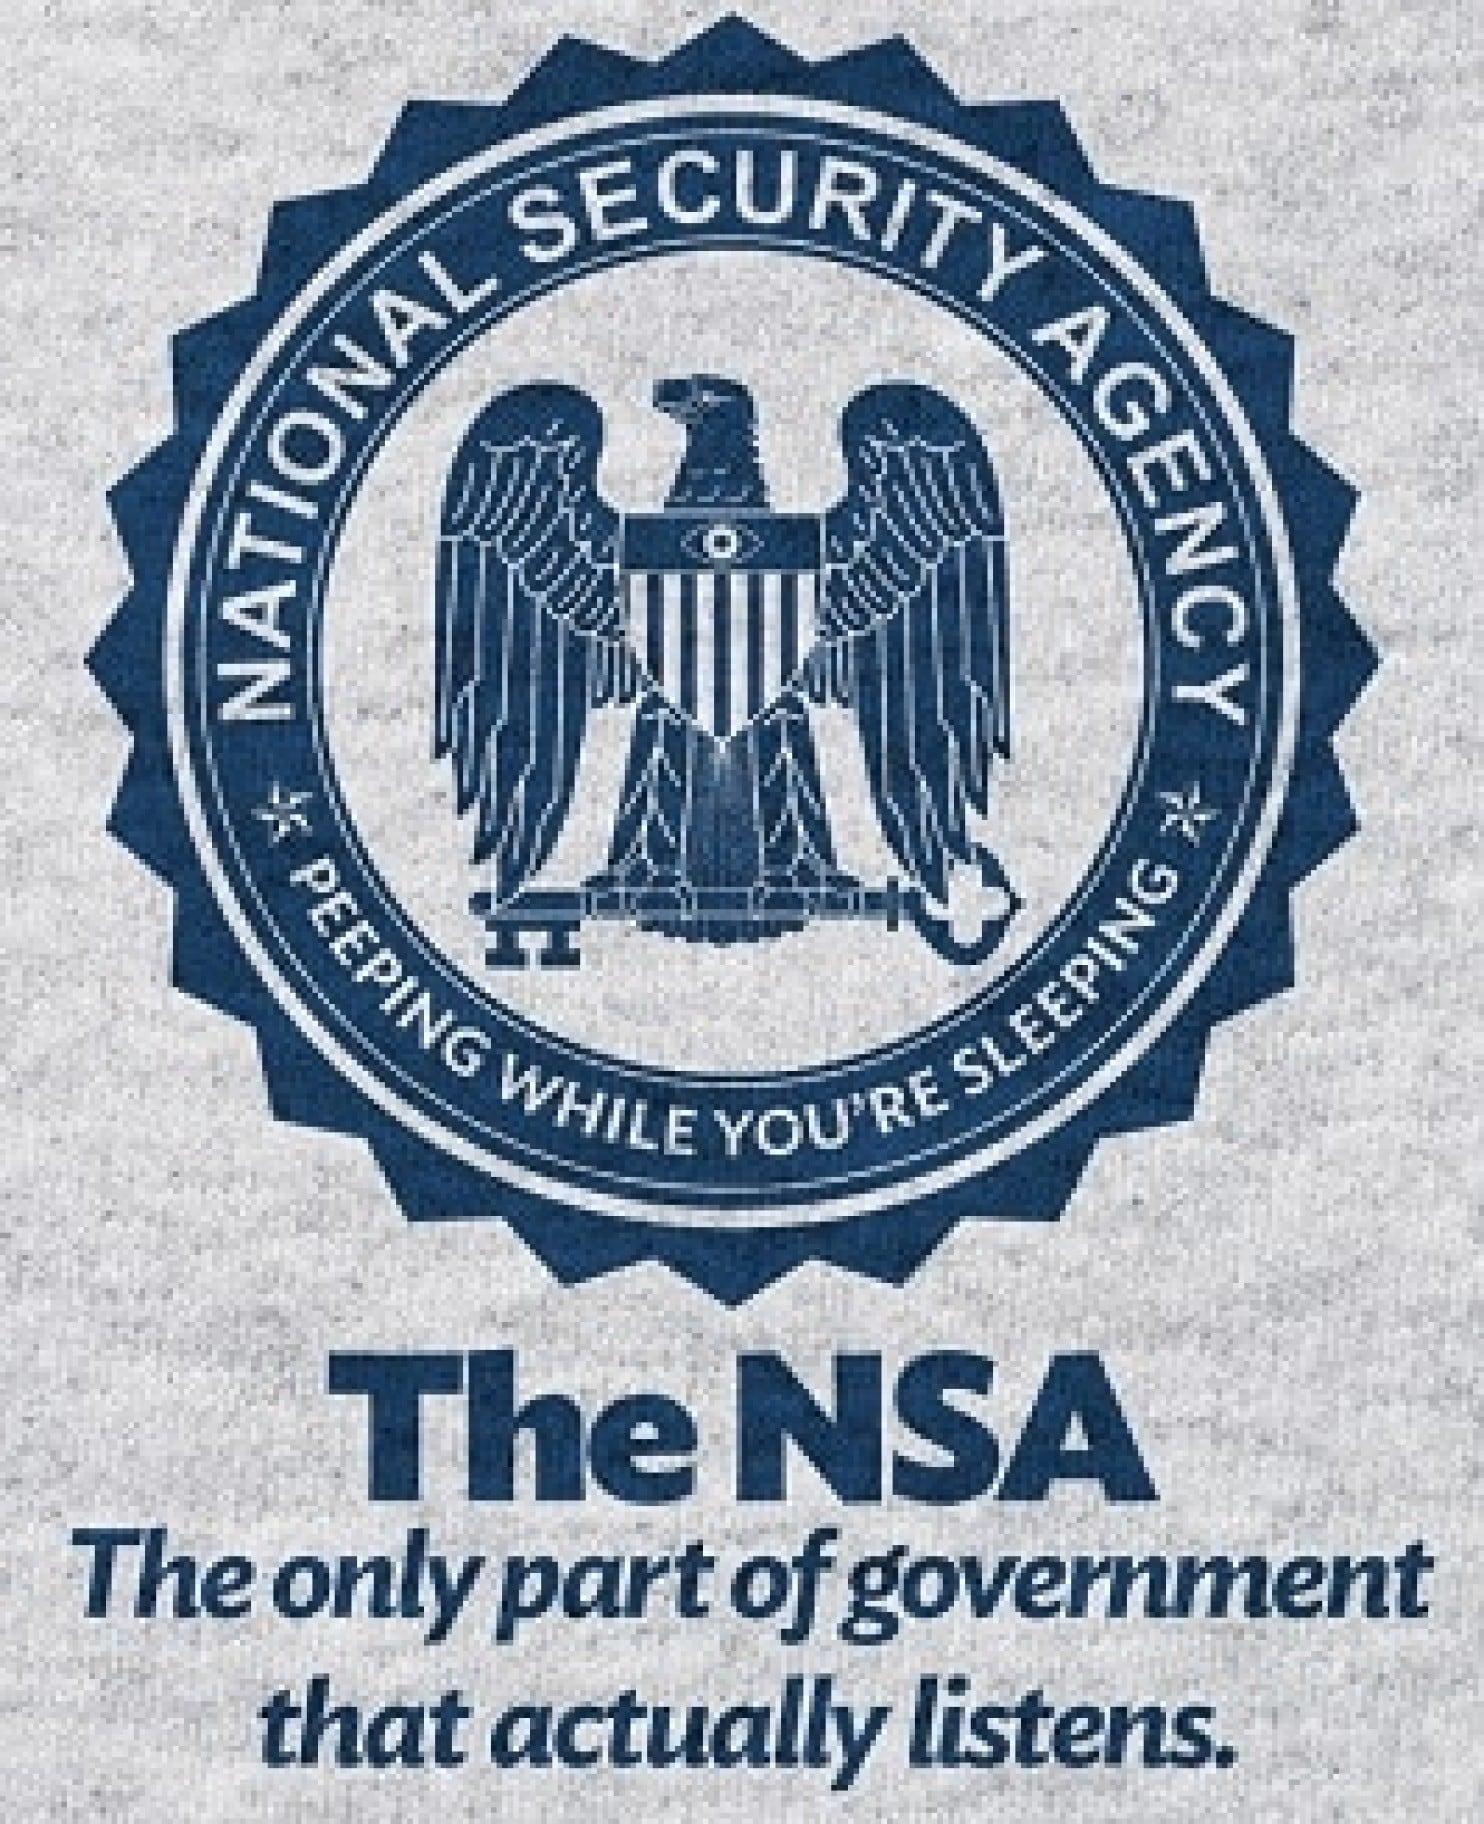 Fall Can I Use Logo - NSA Concedes: Parody T Shirts That Use NSA's Name And Logo Aren't